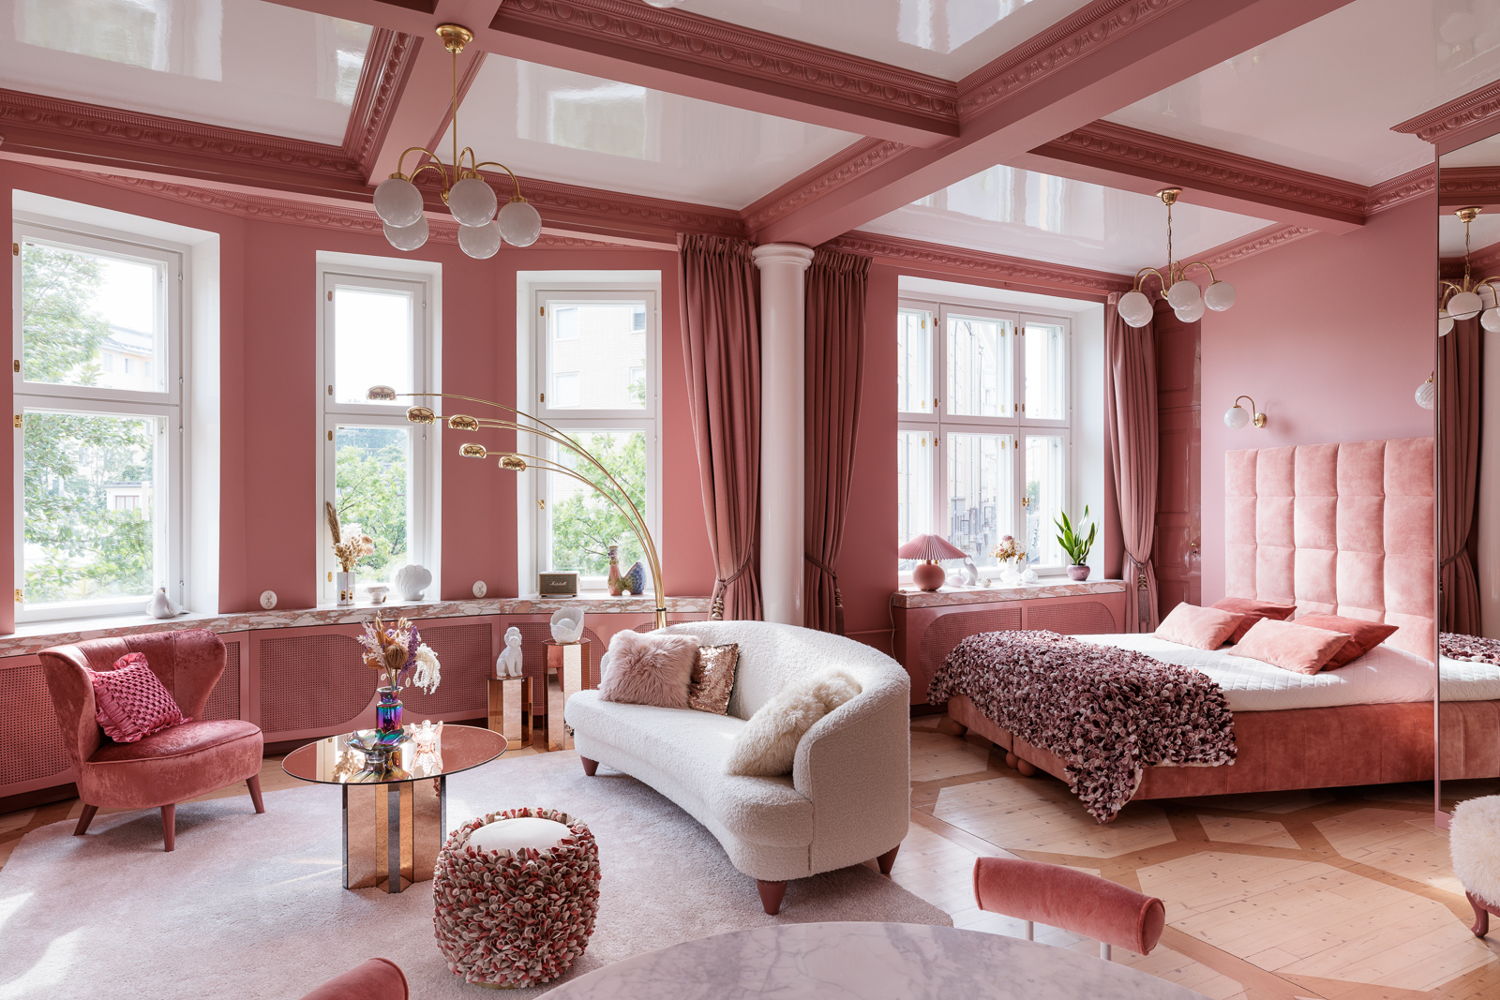 Airbnb - luxurious pink suite in Helsinki in Finland - Photo courtesy of Airbnb